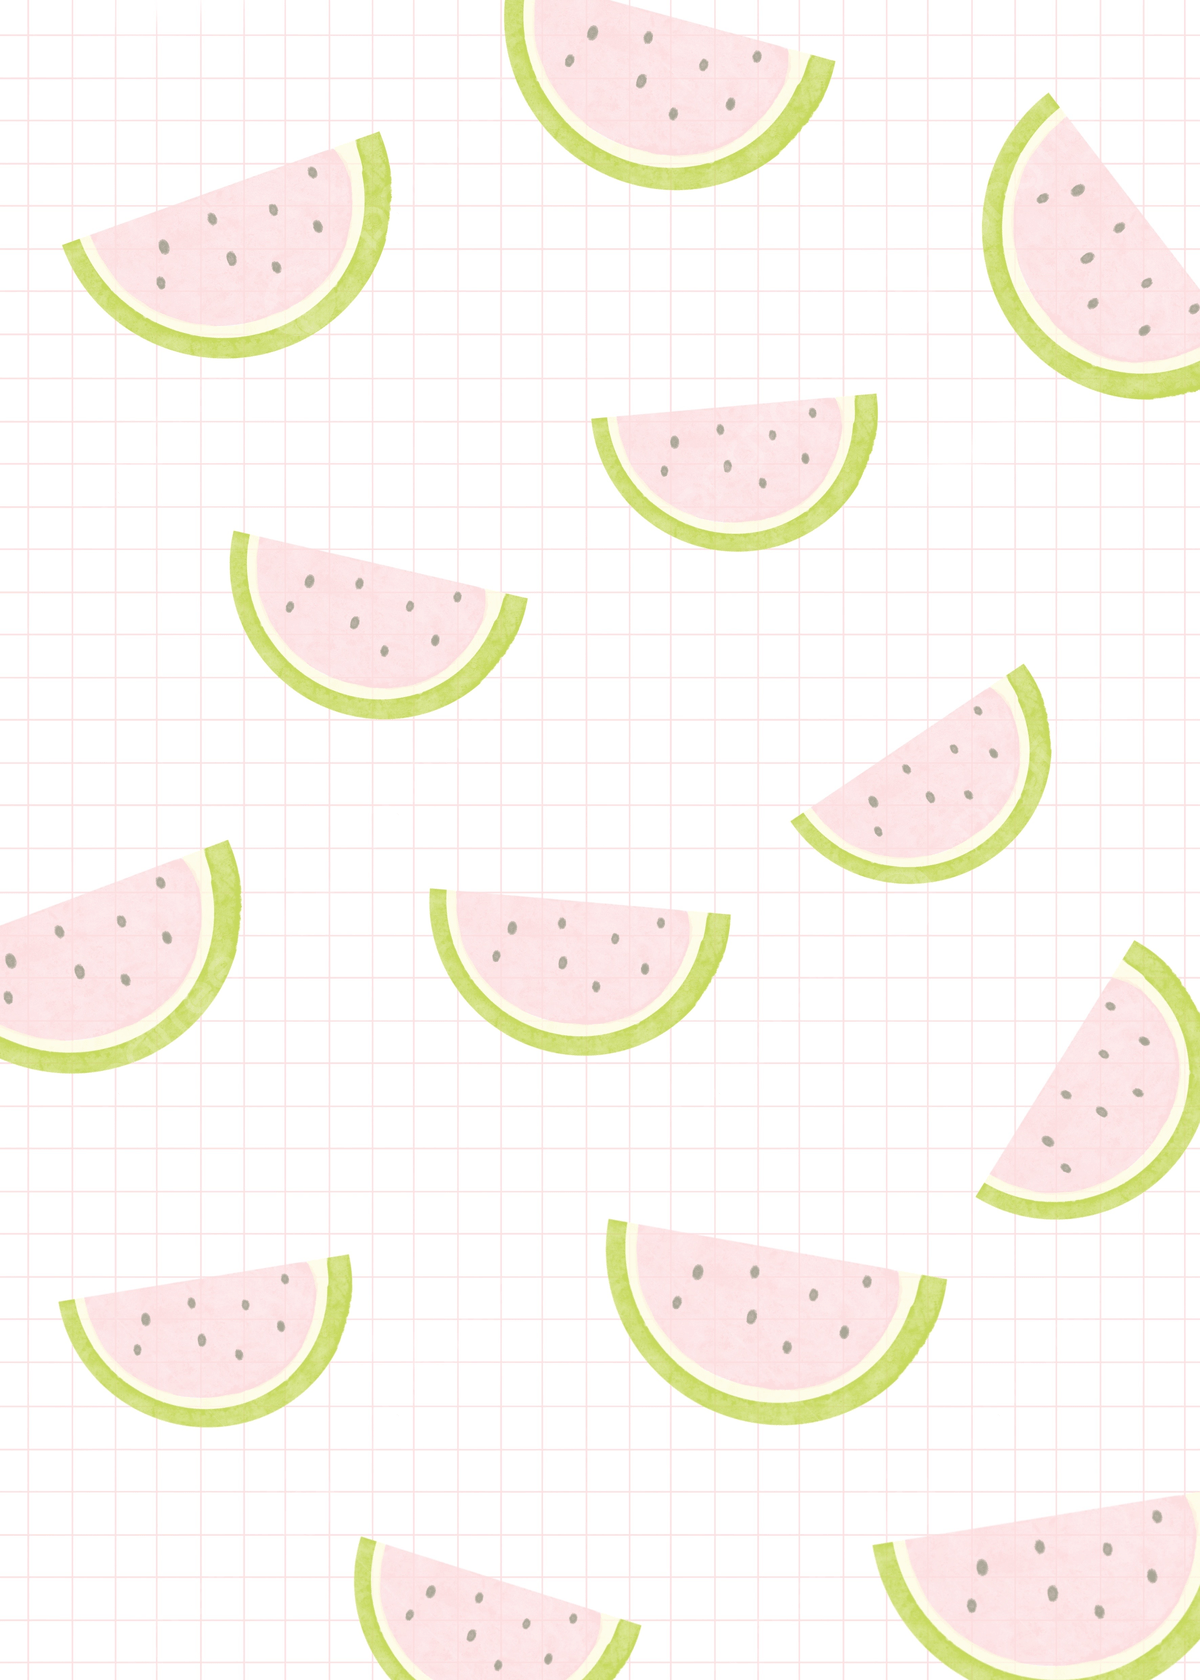 Gripet Simple Cute Watermelon Background Wallpaper, Summer, Watermelon, Wallpaper Background Image for Free Download